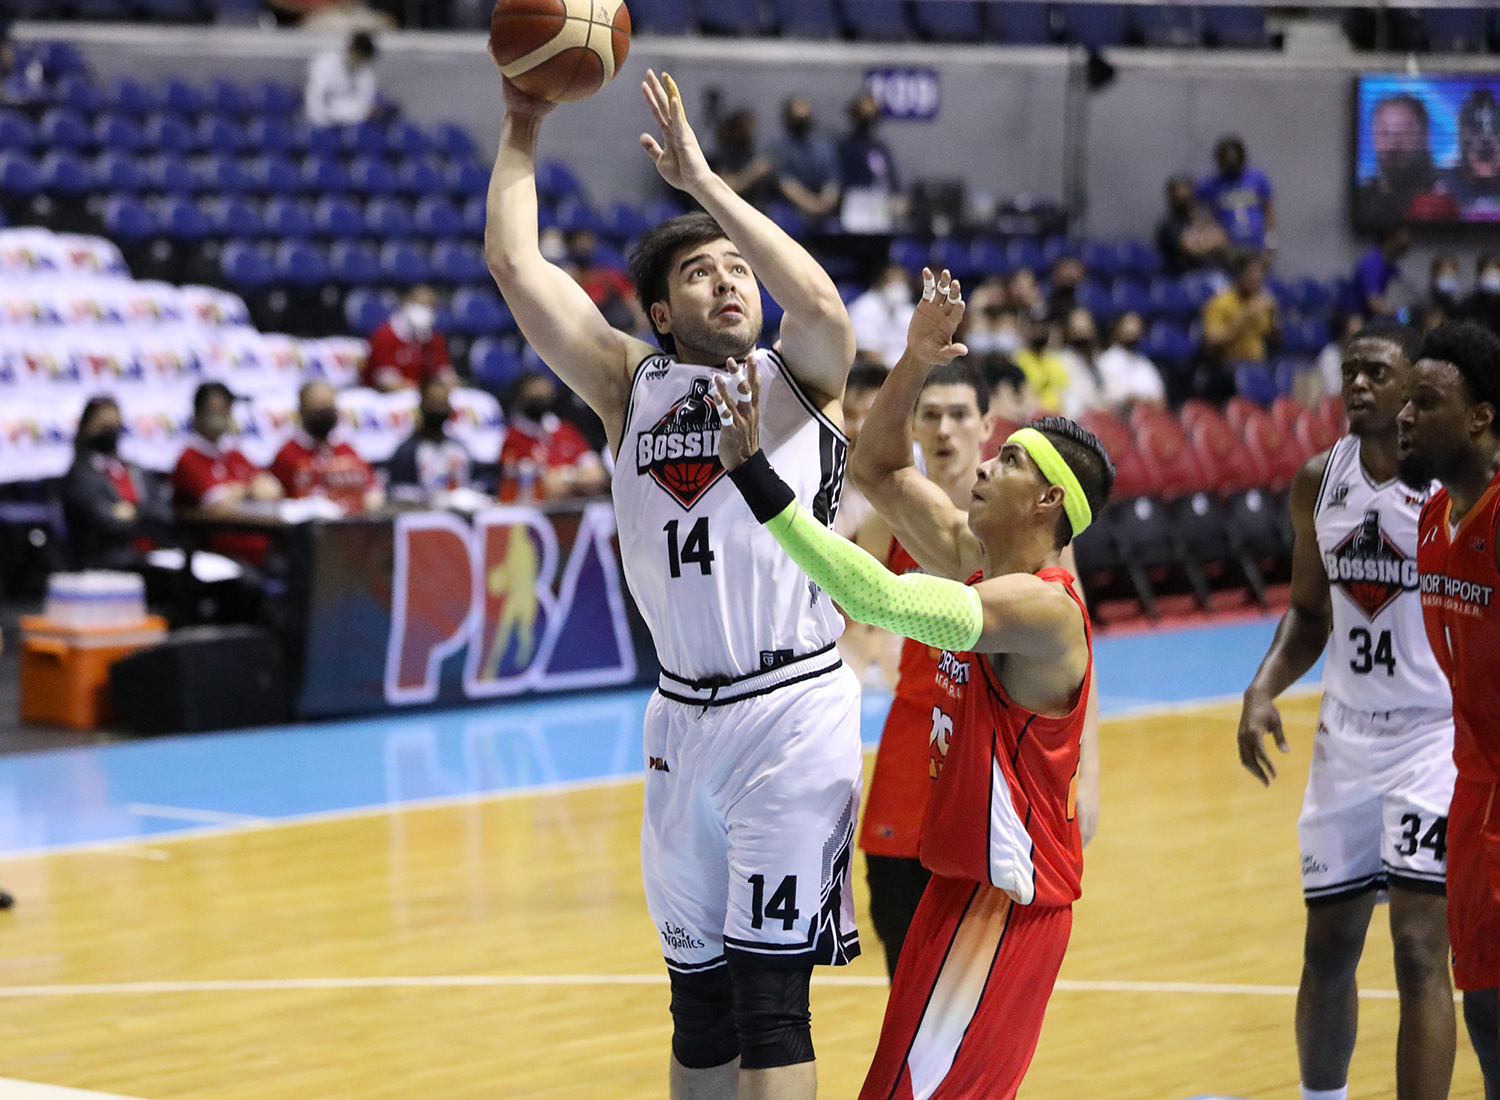 Blackwater's Andre Paras is retiring from the PBA. –PBA IMAGES